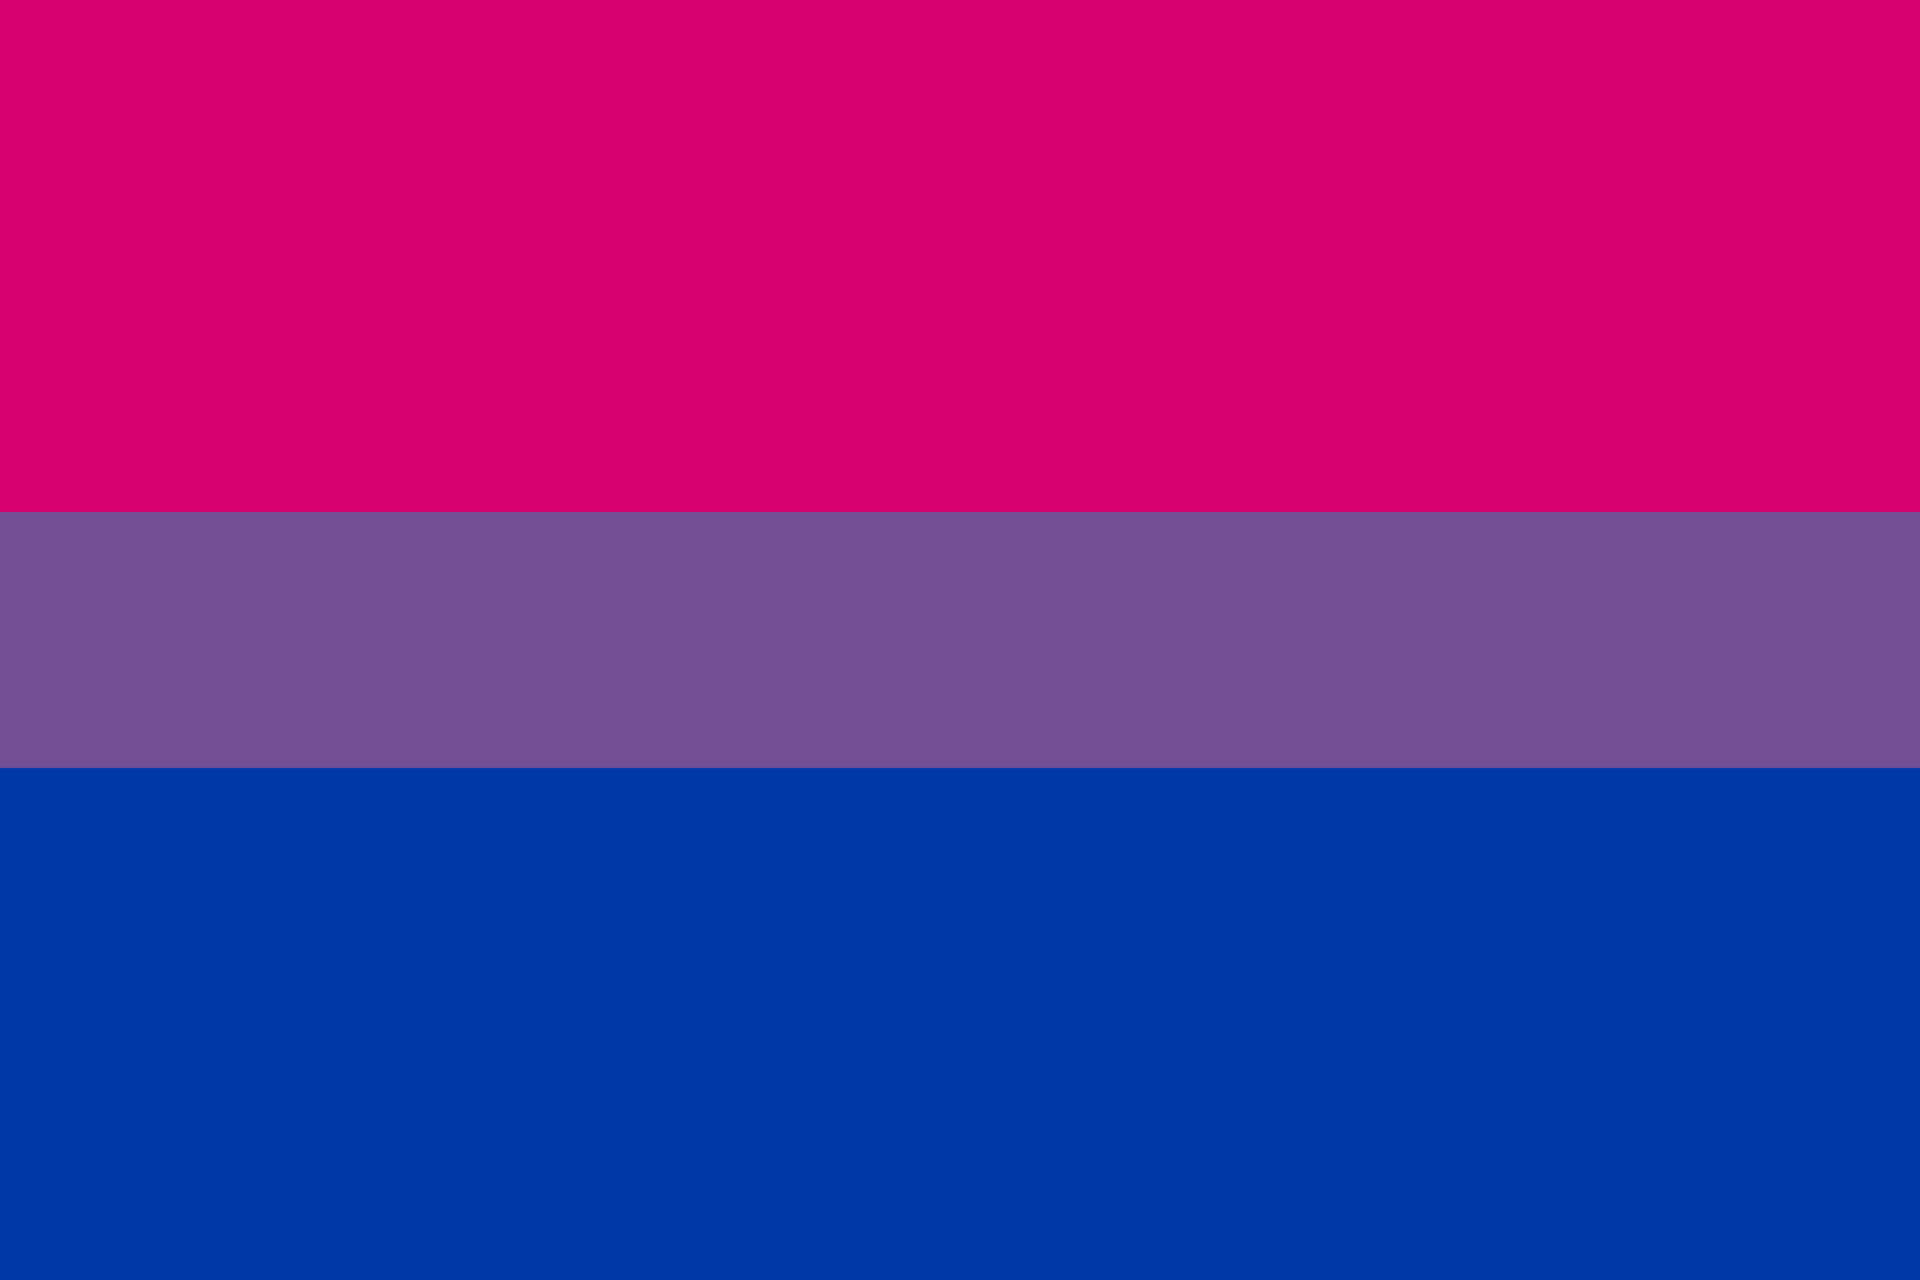 Expressing Identity with the Bisexual Pride Flag Wallpaper